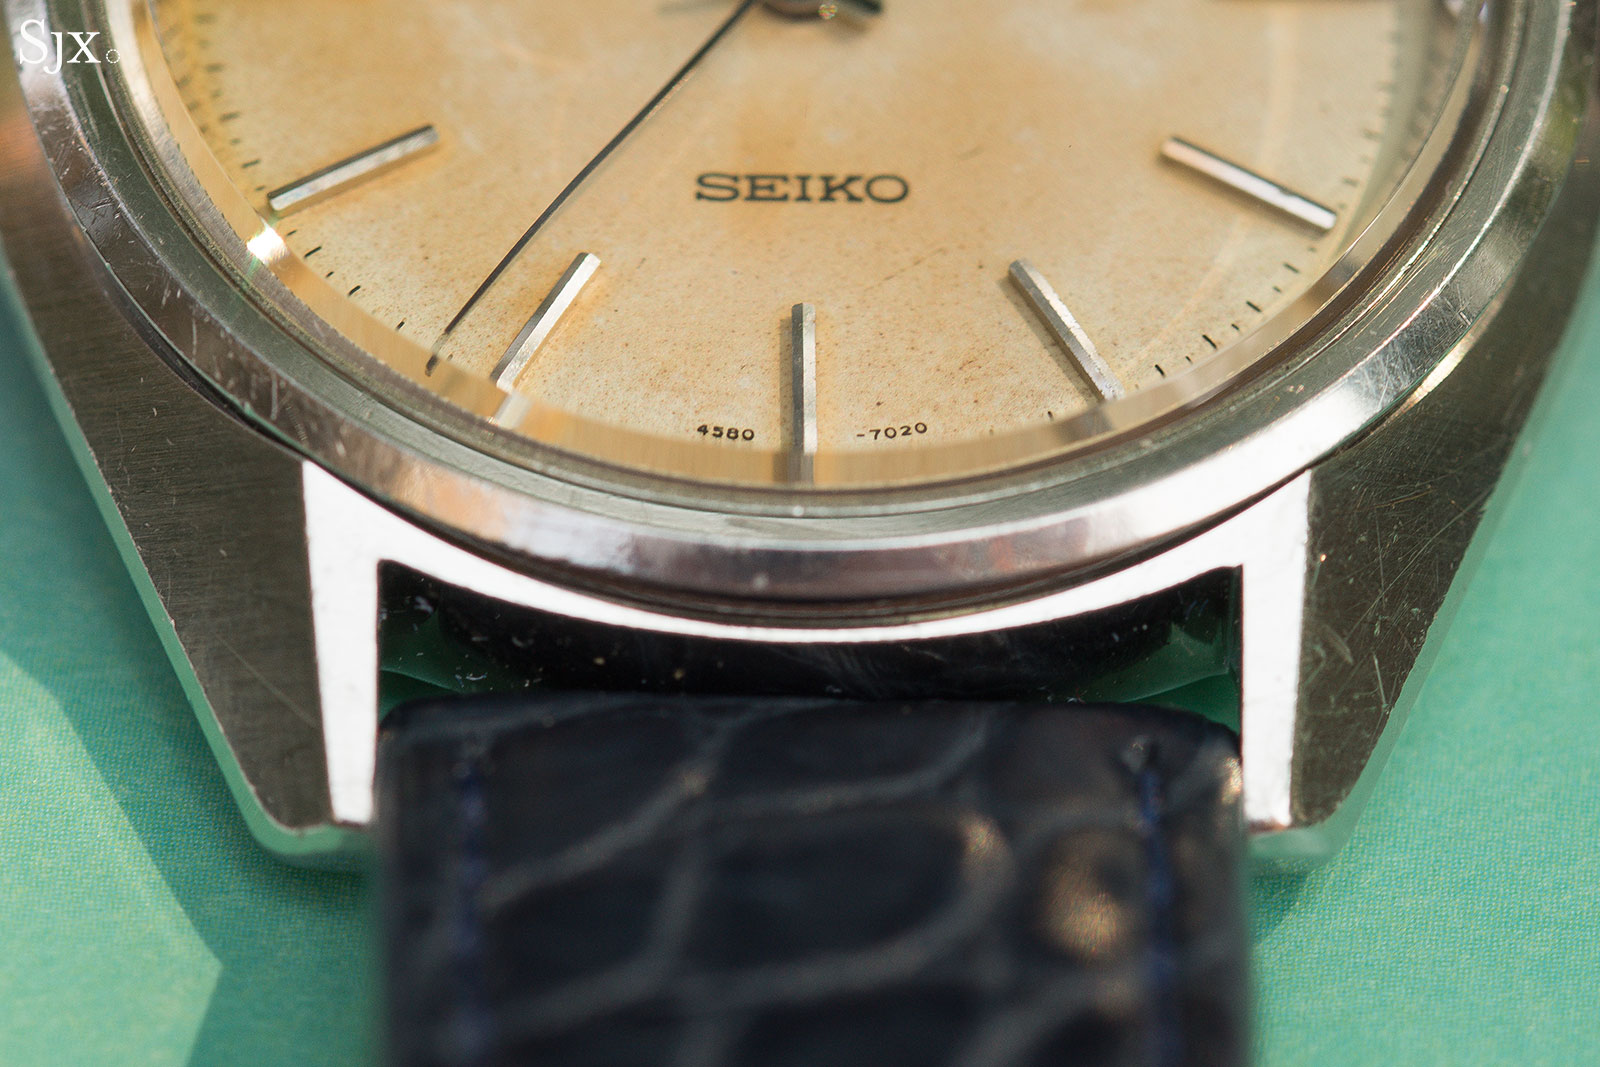 Catching a Unicorn – The Seiko Gifted by the Emperor of Japan | SJX Watches